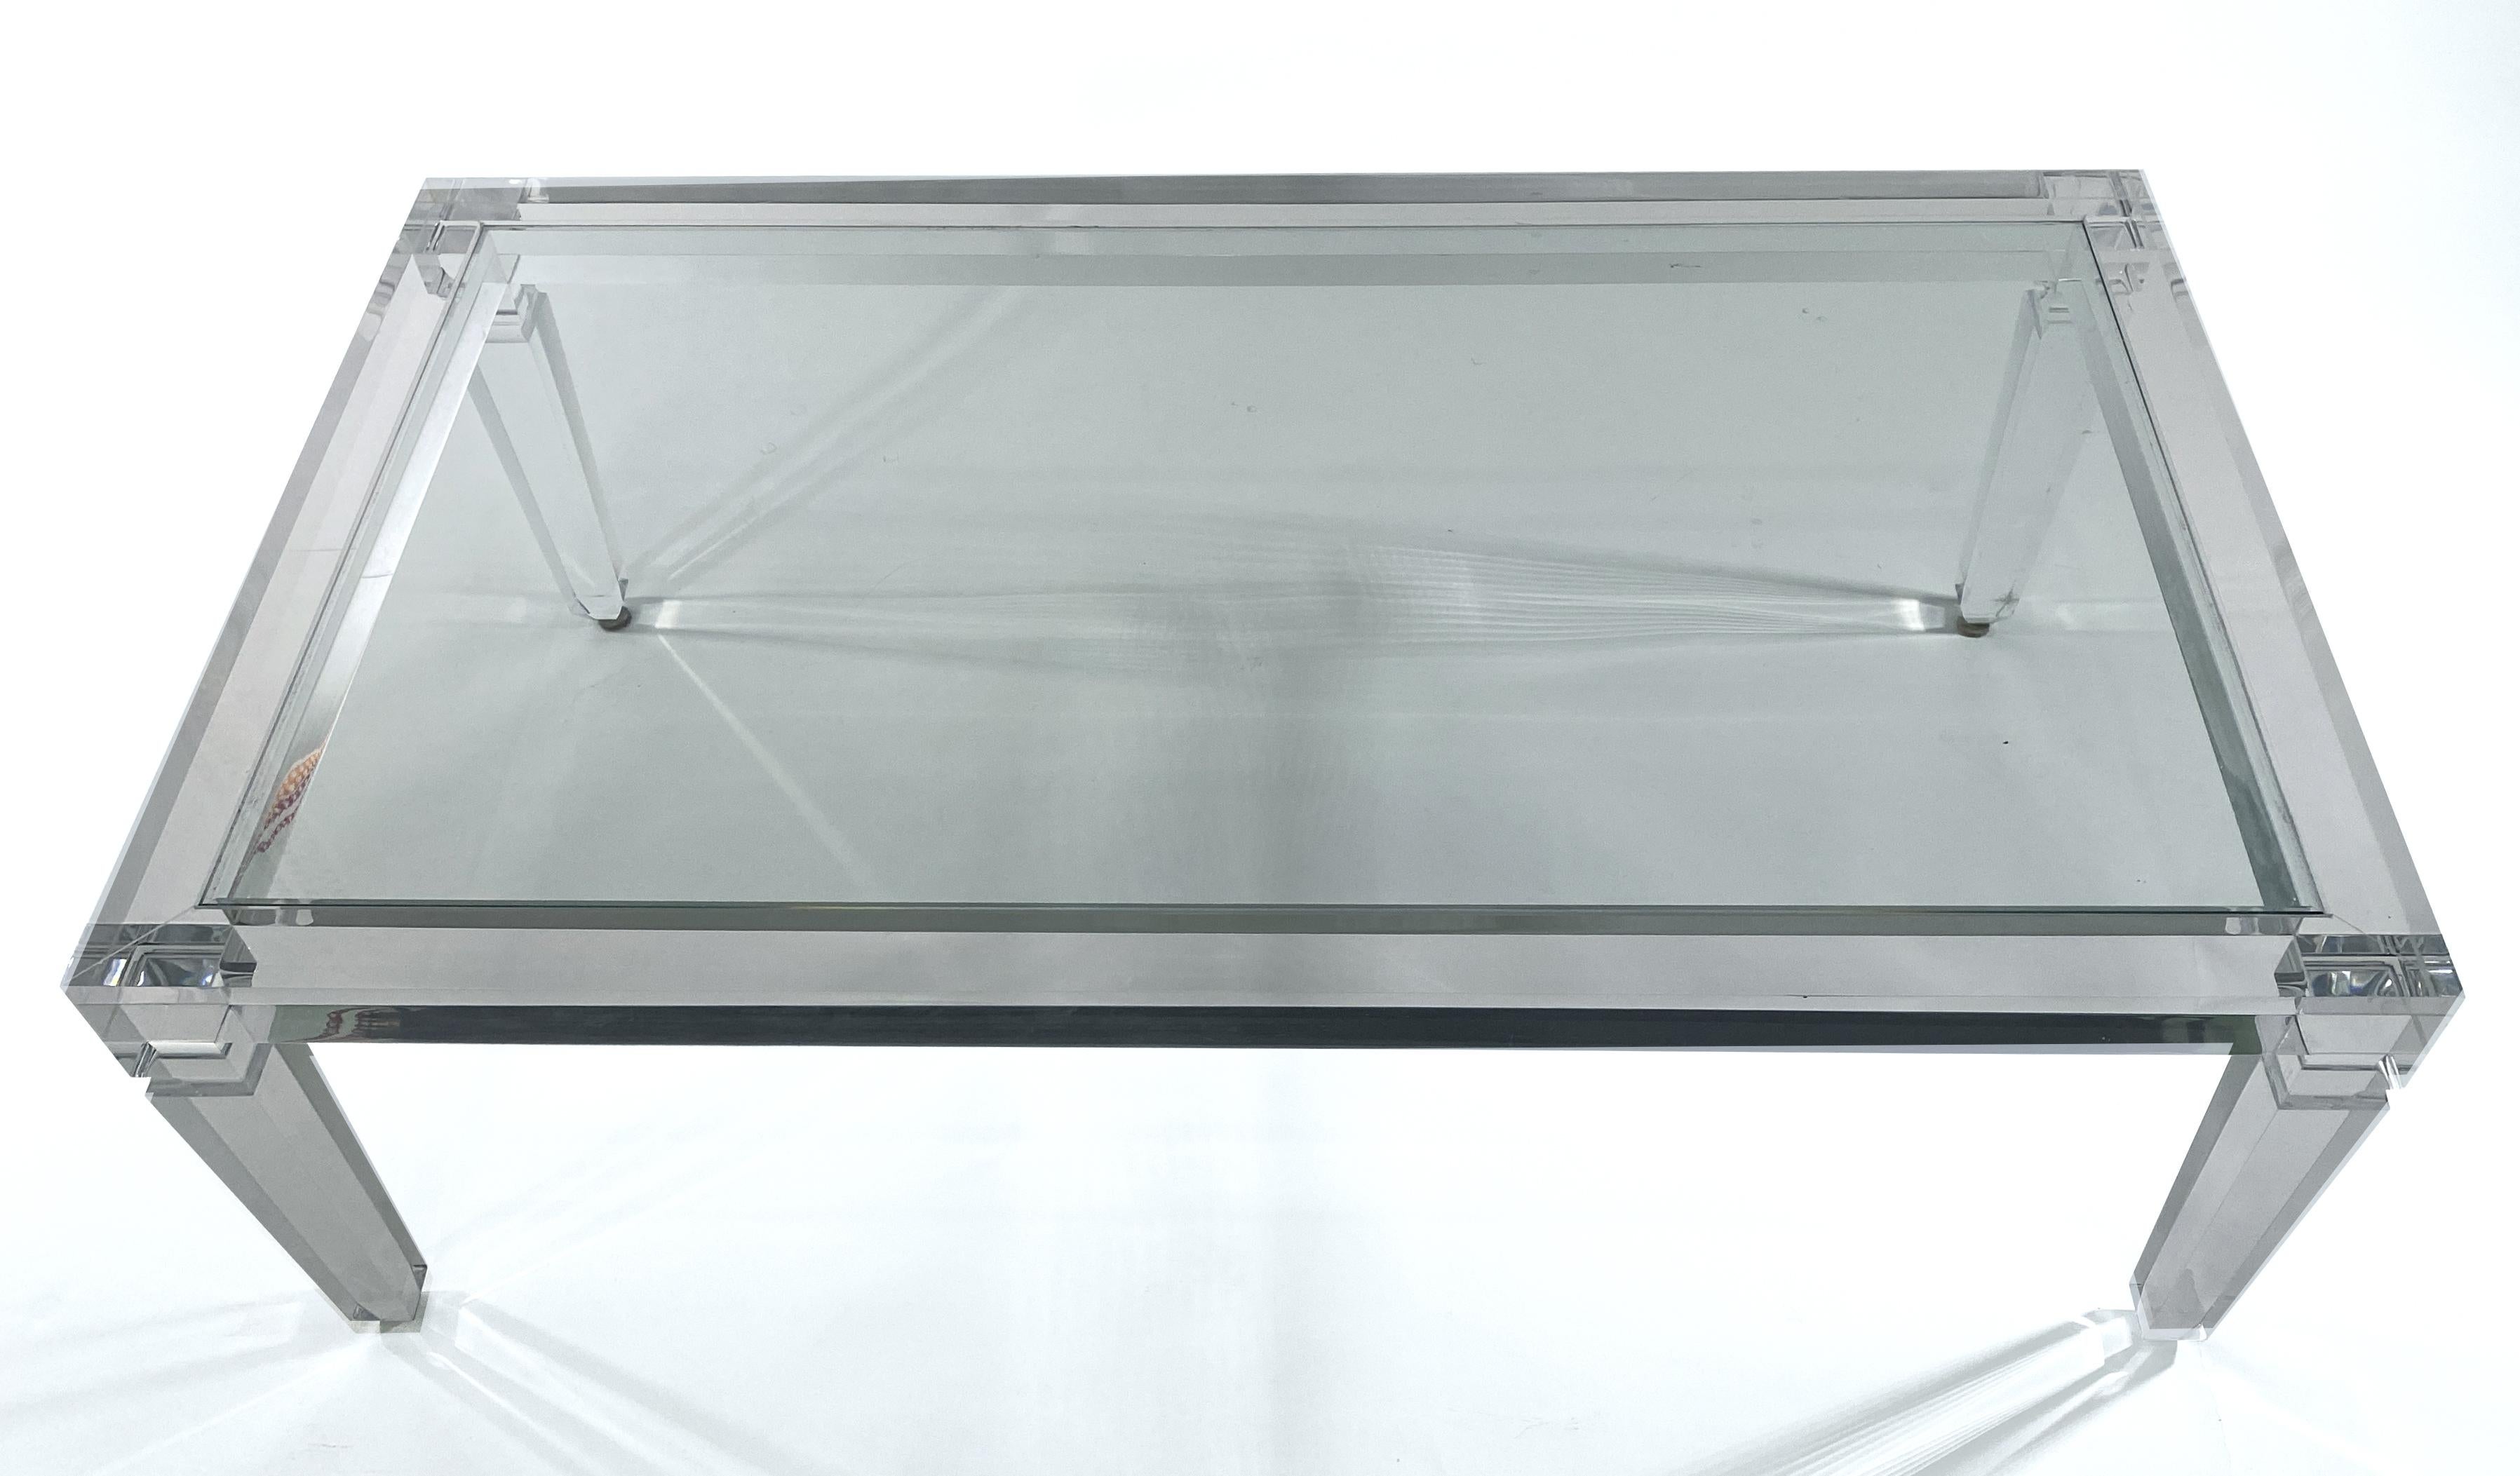 An American Modern Lucite Coffee table by Lucite artist Charles Hollis Jones.
The rectangular table is highlighted by neoclassical legs that resemble glass. The glass top is inset into the table for both safety and comfort.
This table is